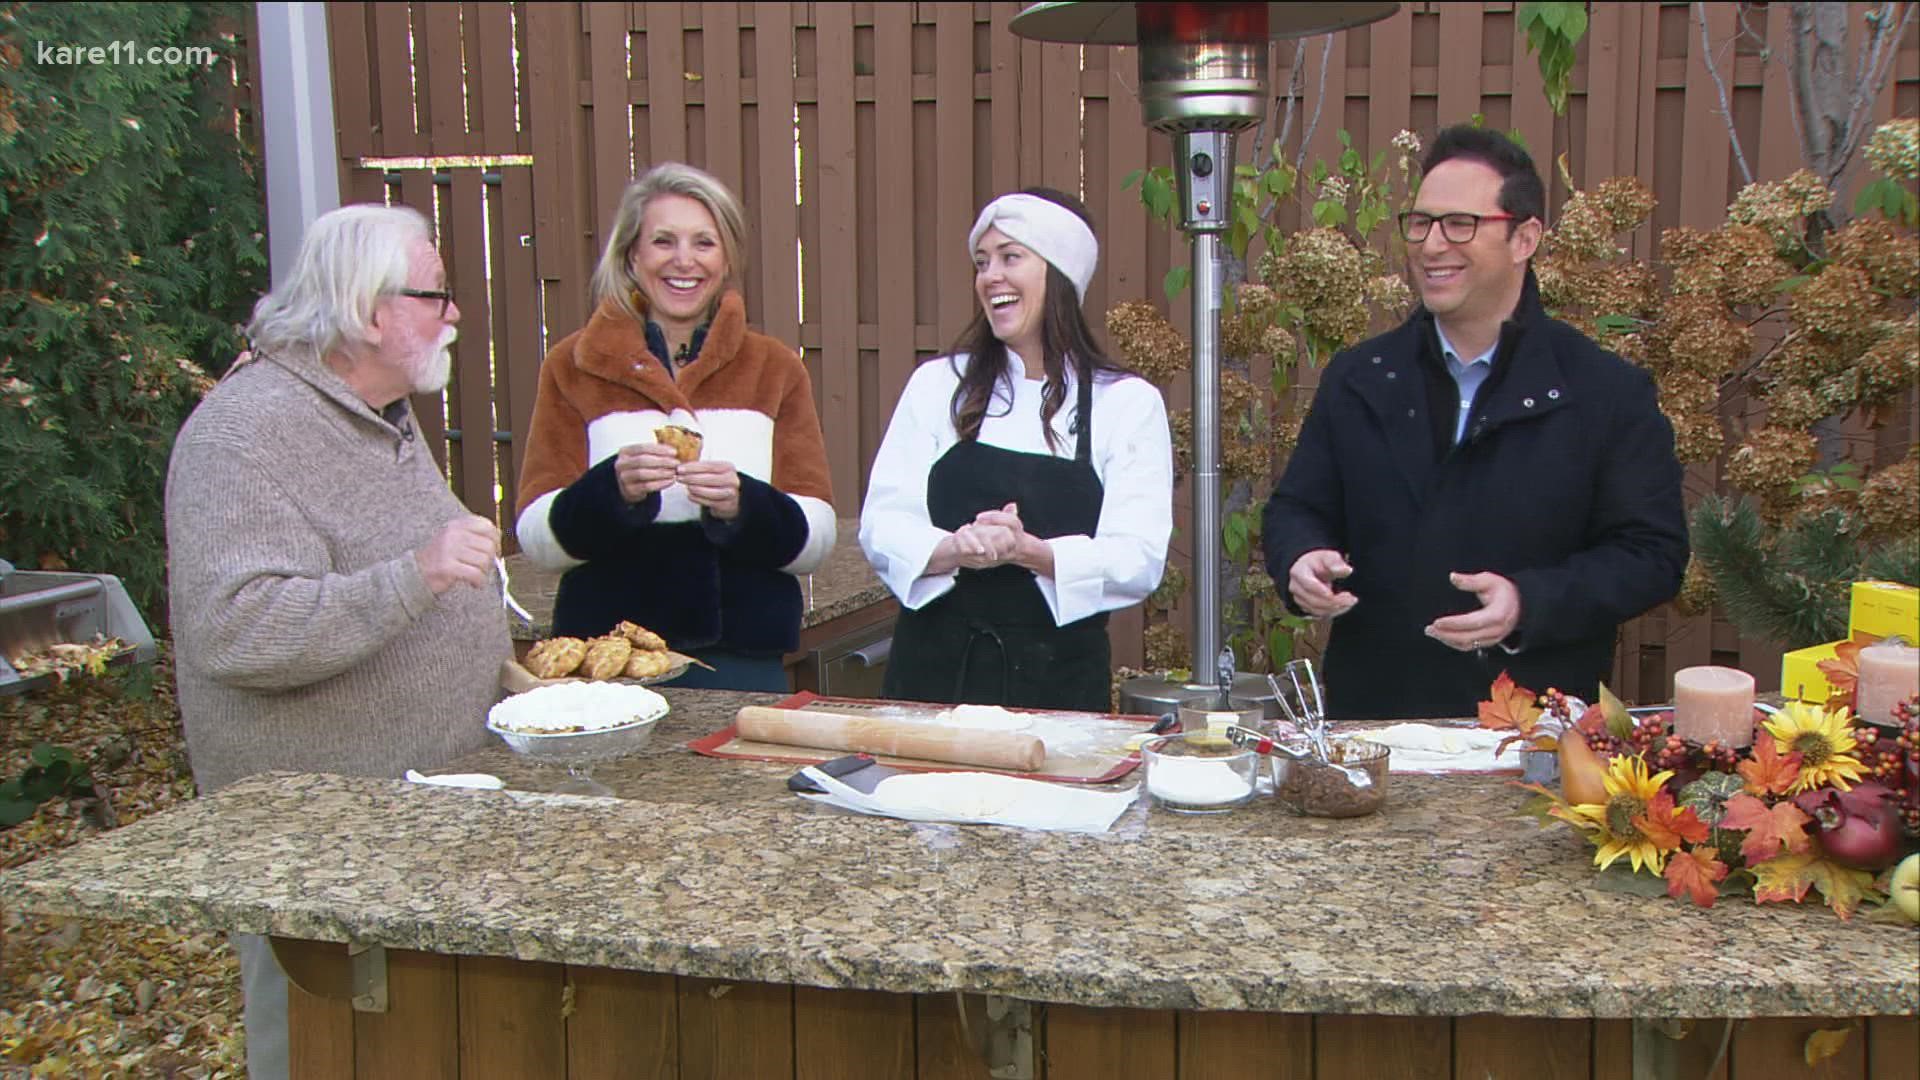 Cupcake Wars winner Alicia Hinze founded The Buttered Tin in St. Paul in 2013. She shared her recipe for pecan hand pies on KARE 11 Saturday.